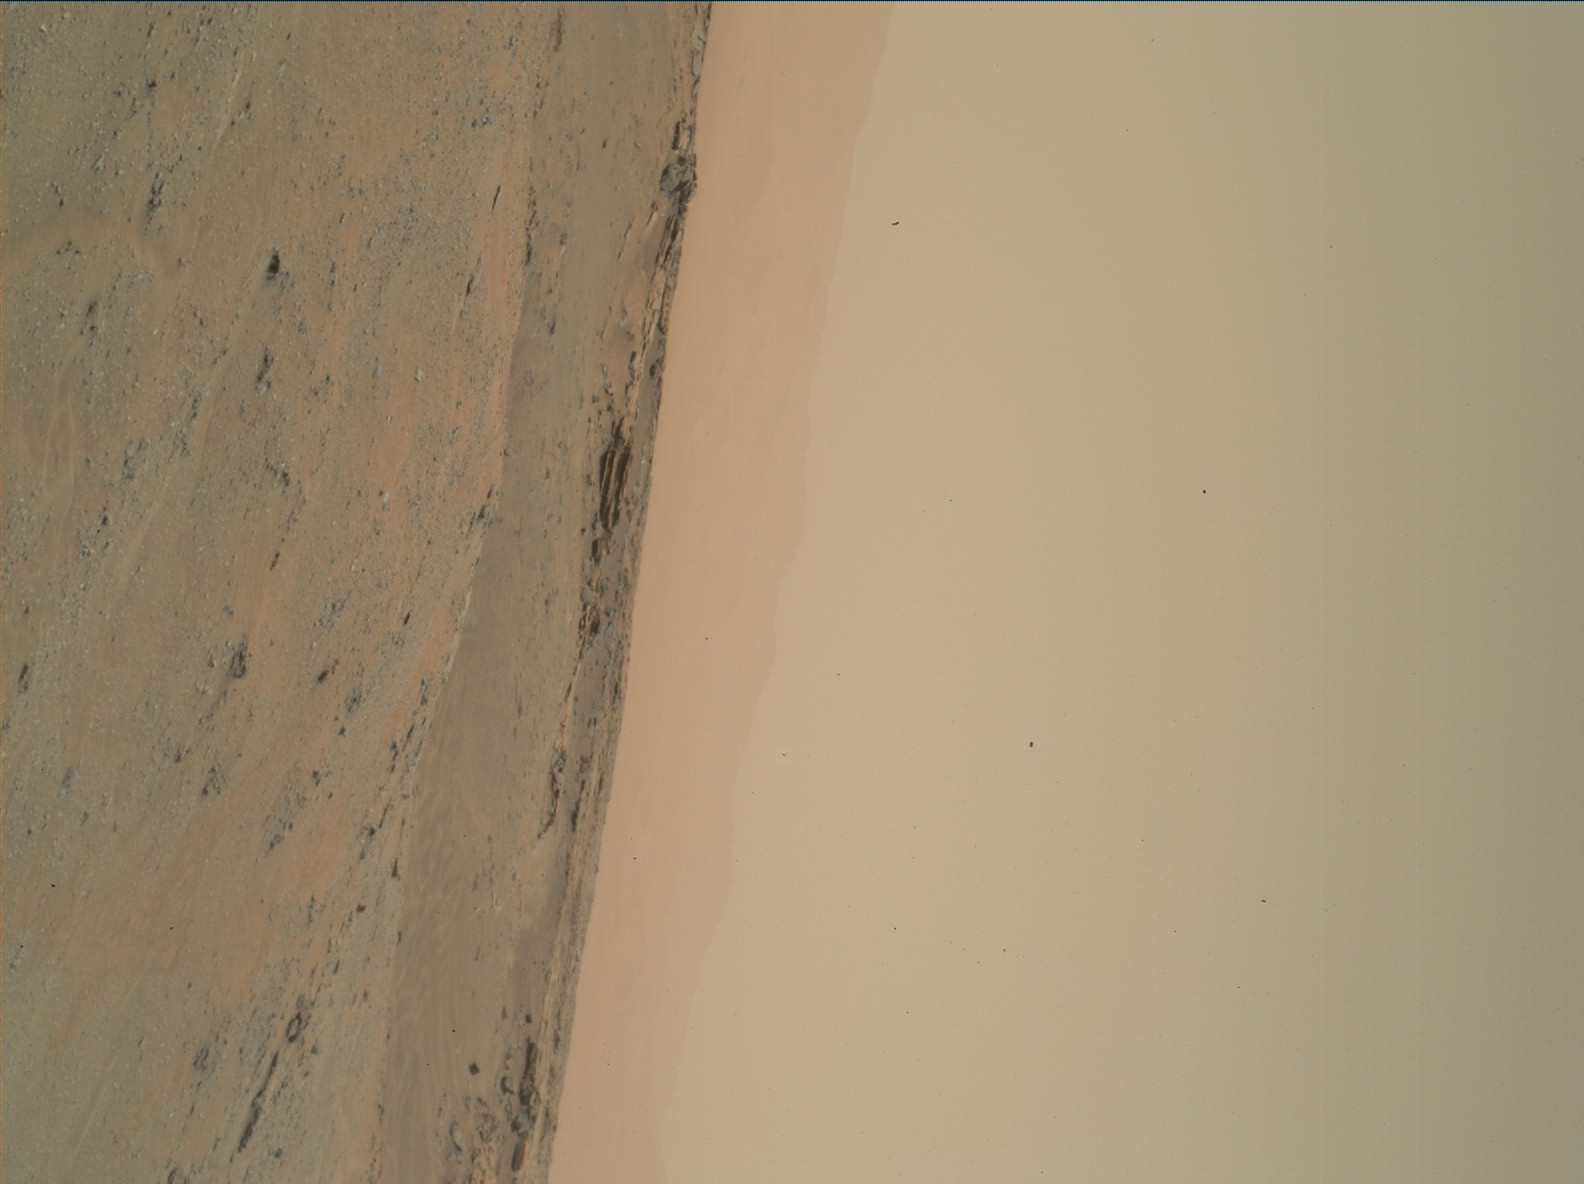 Nasa's Mars rover Curiosity acquired this image using its Mars Hand Lens Imager (MAHLI) on Sol 882